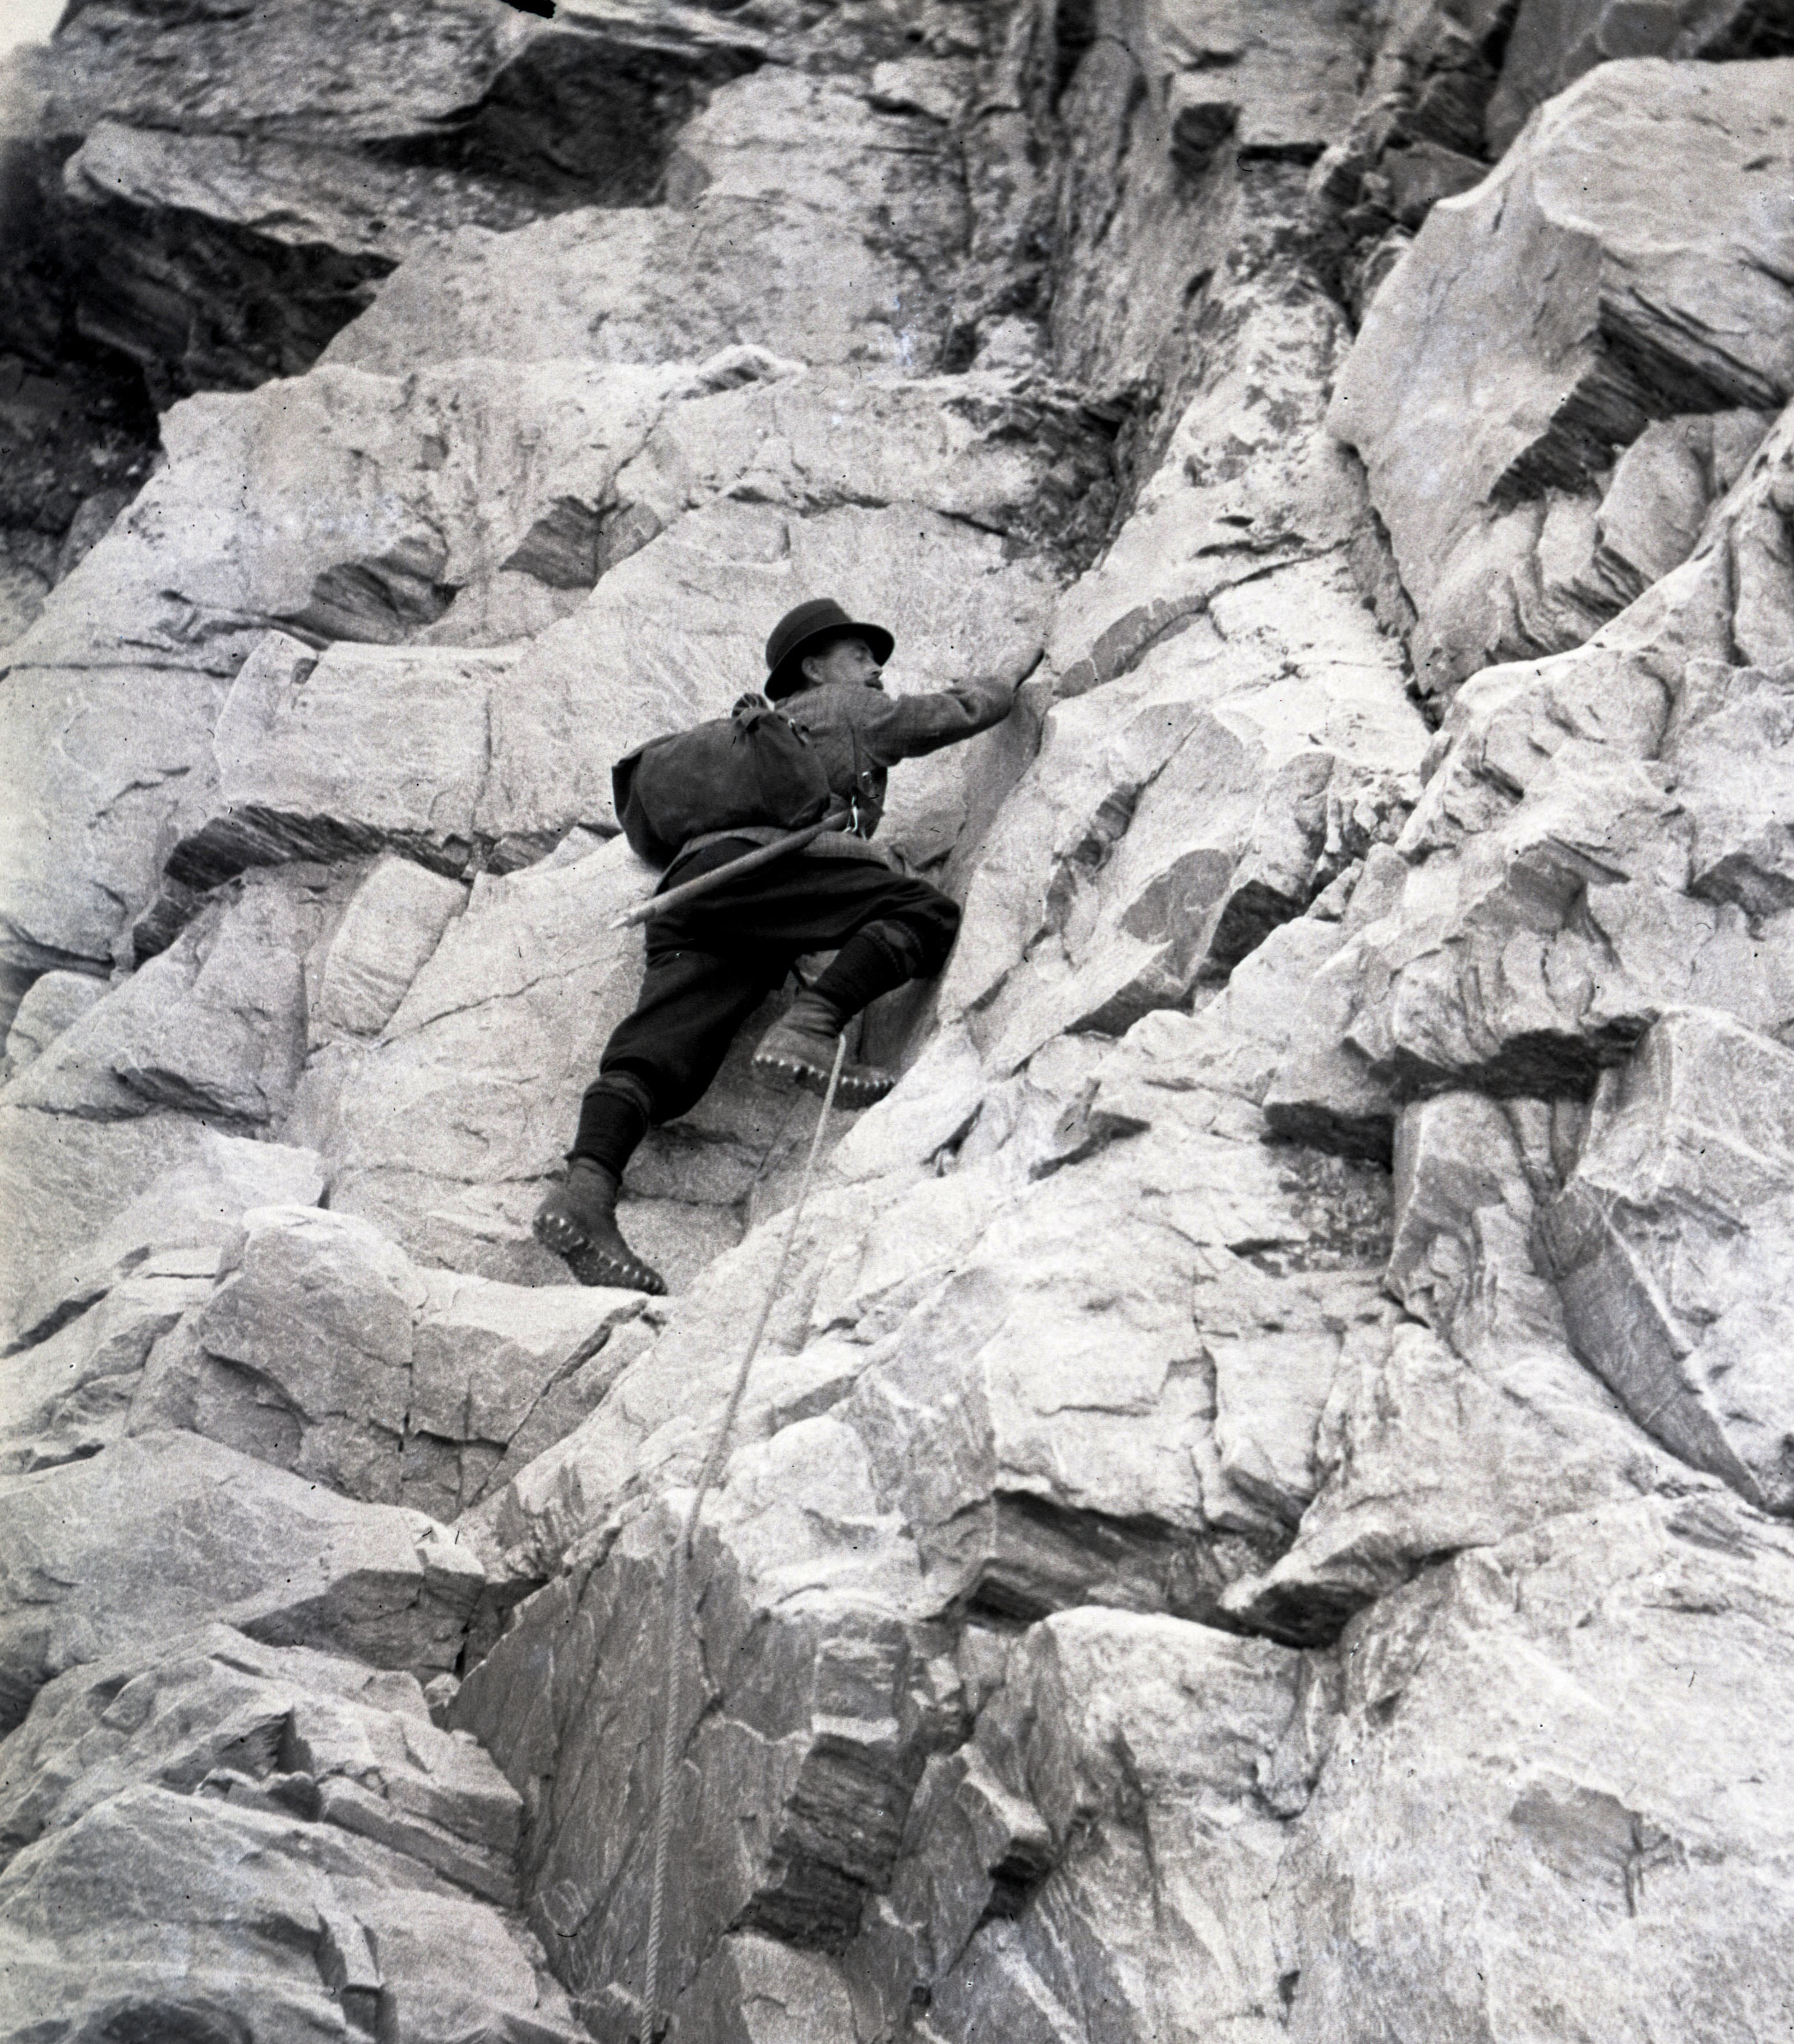  A climber on Mount Sir Donald in Glacier National Park of Canada. Note the use of hobnail boots. 